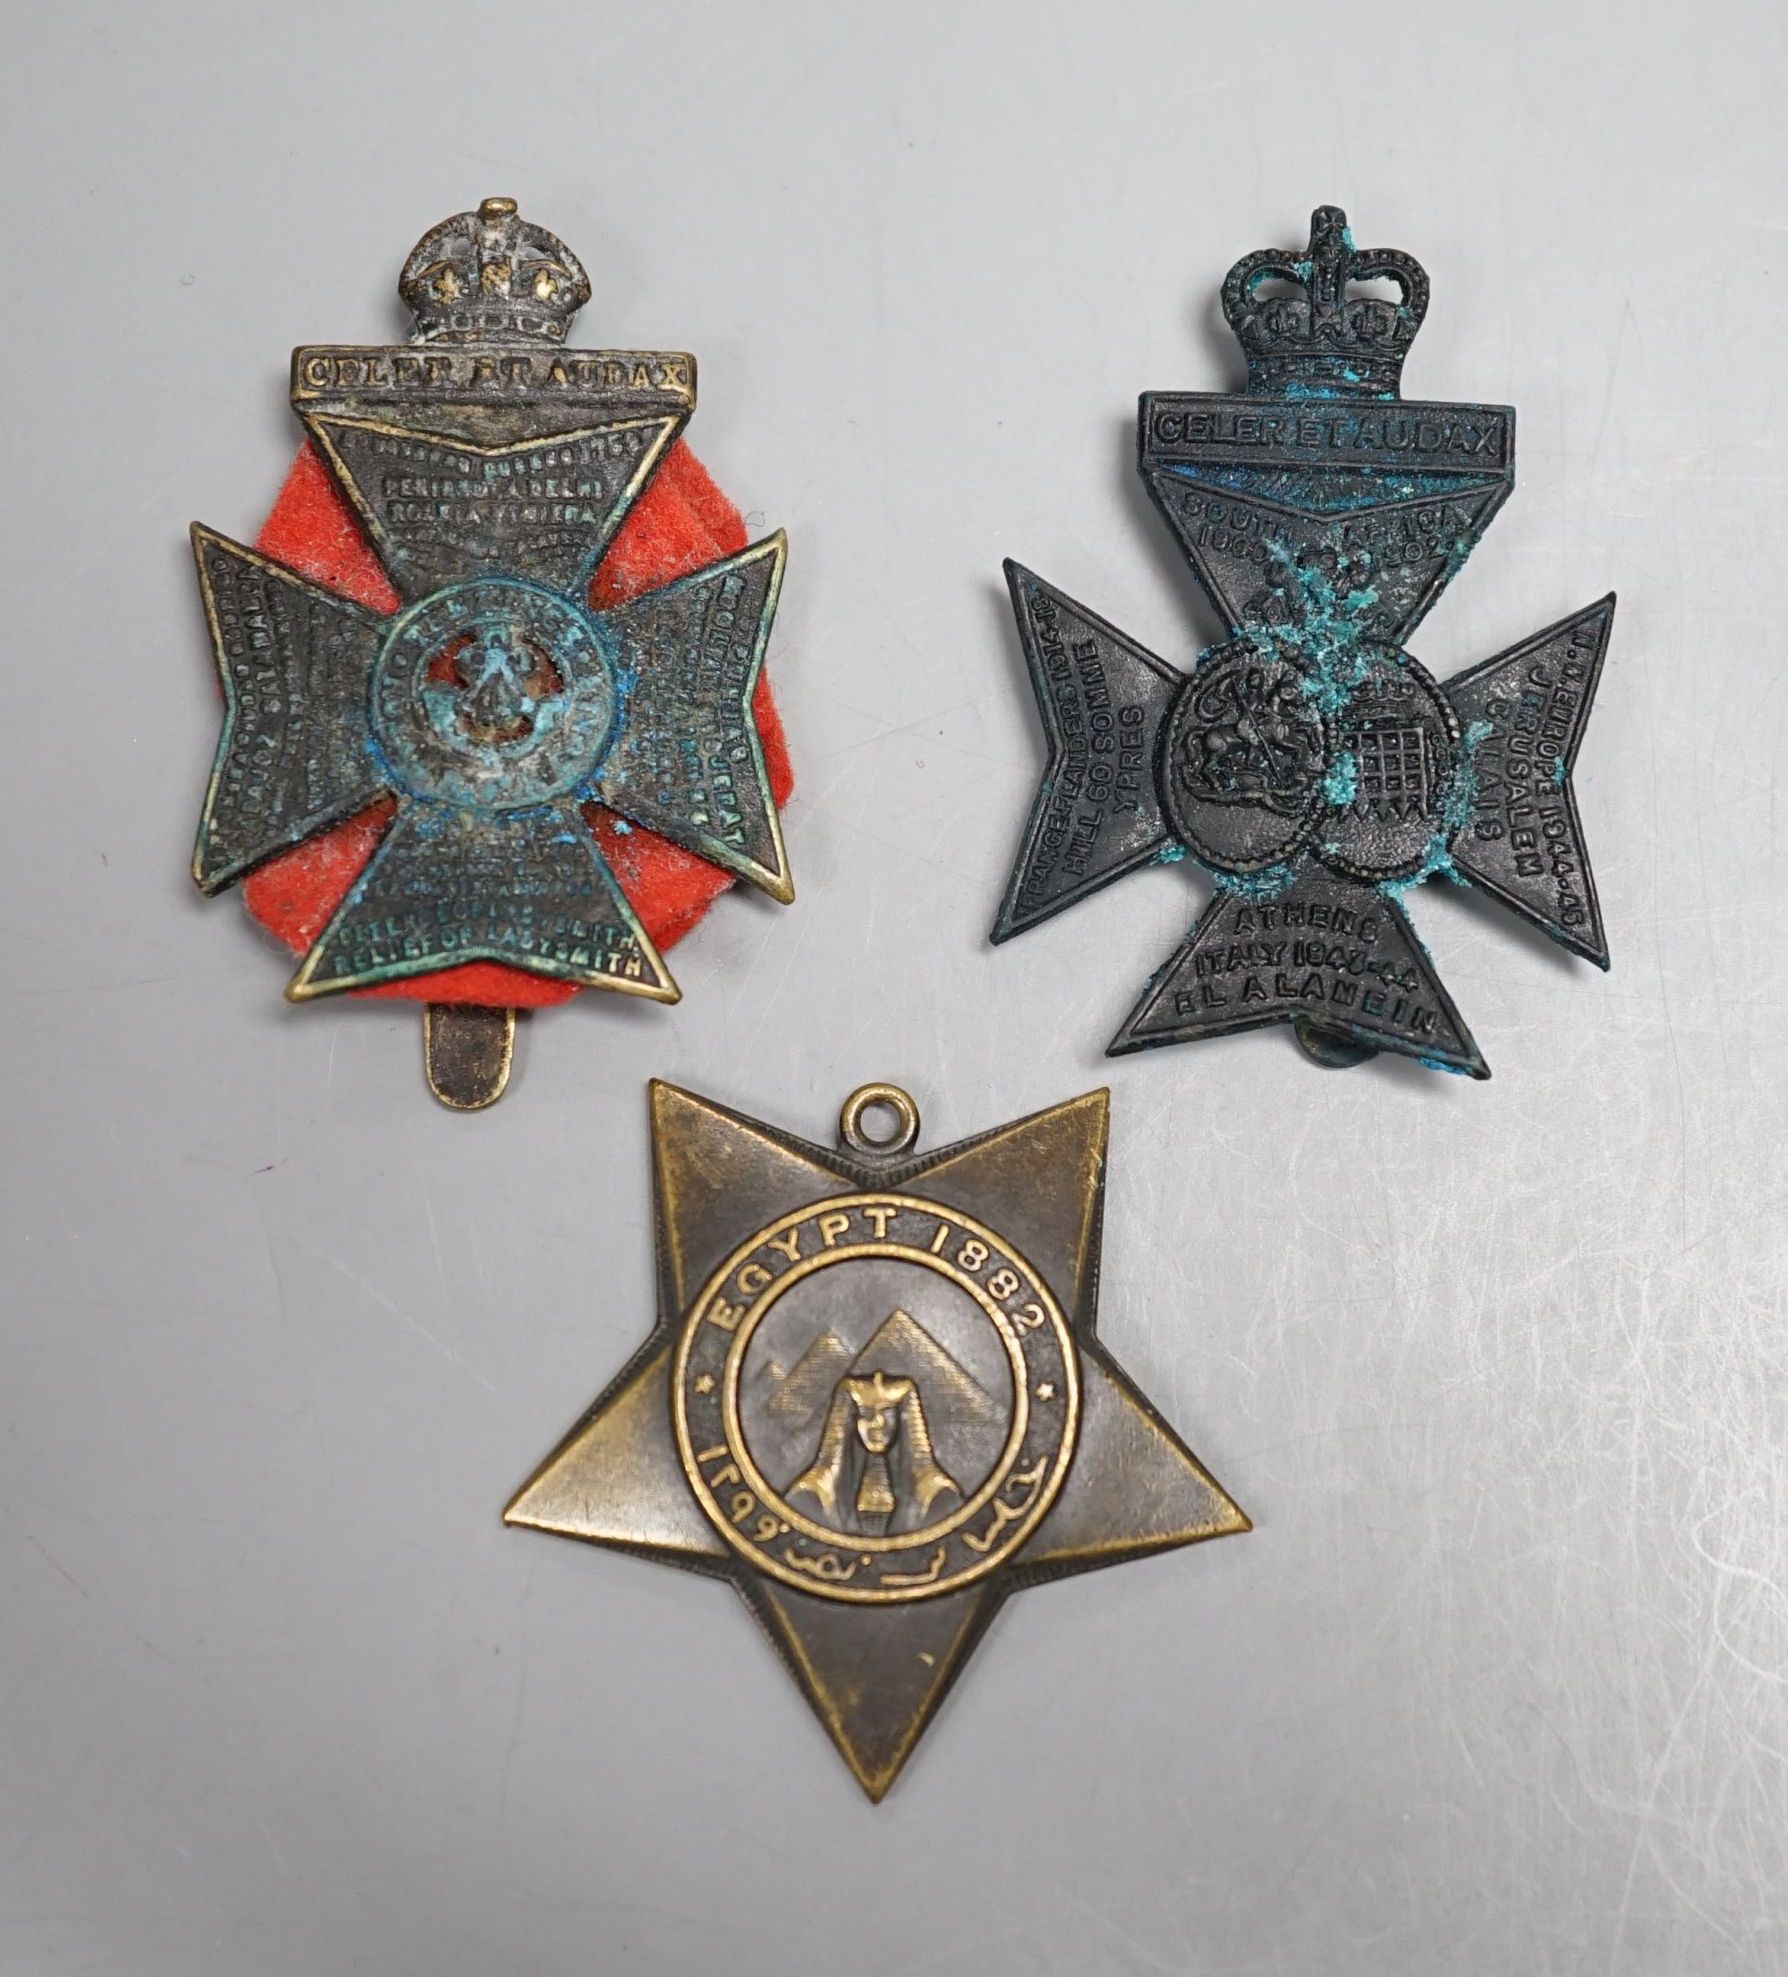 A Khedive's Star, Egypt 1882 and two cap badges.